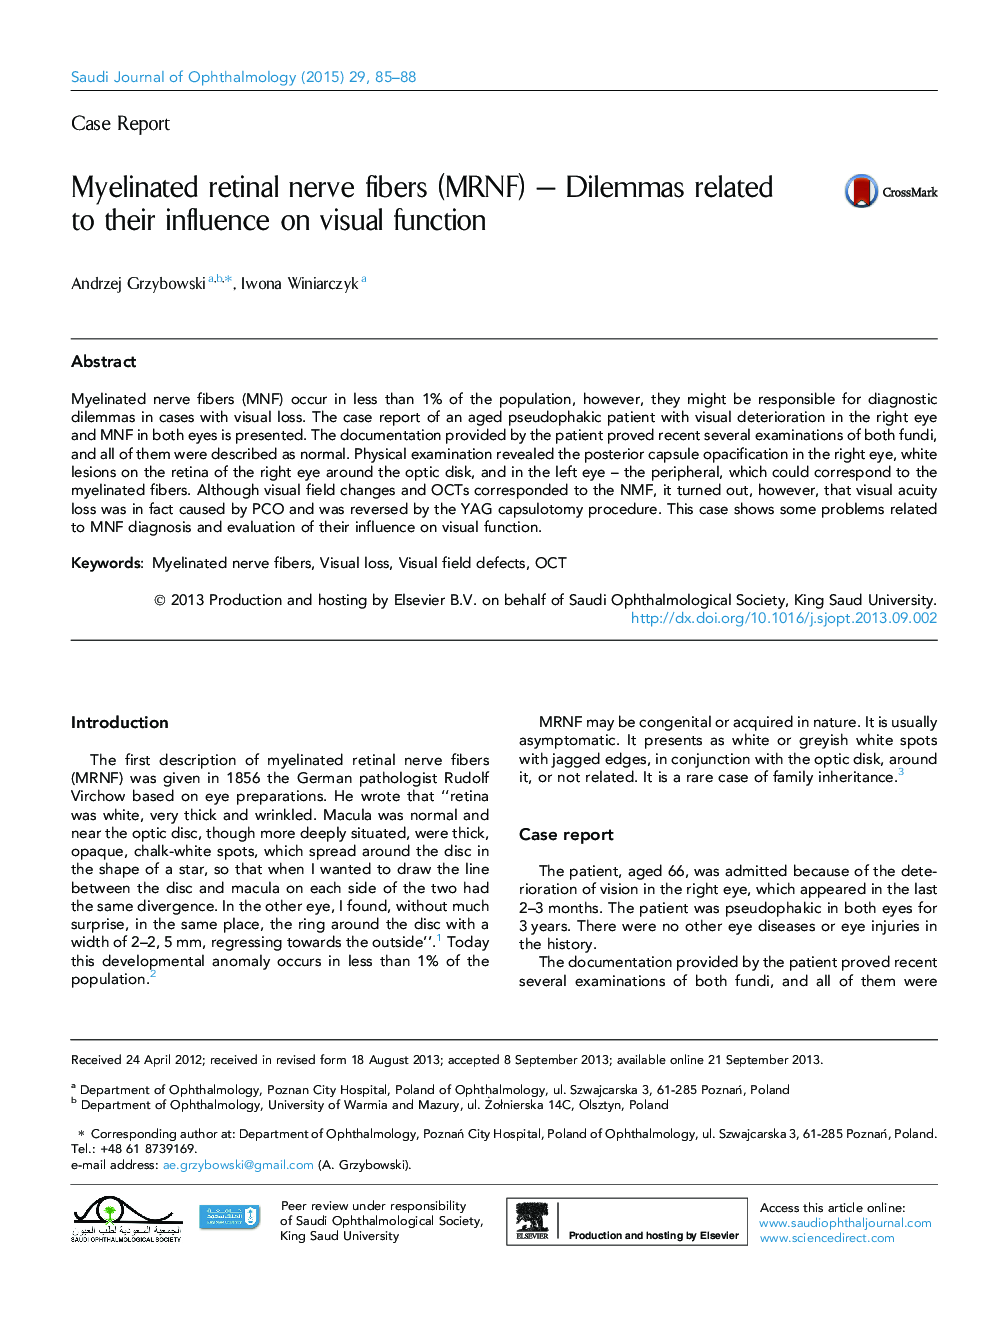 Myelinated retinal nerve fibers (MRNF) – Dilemmas related to their influence on visual function 